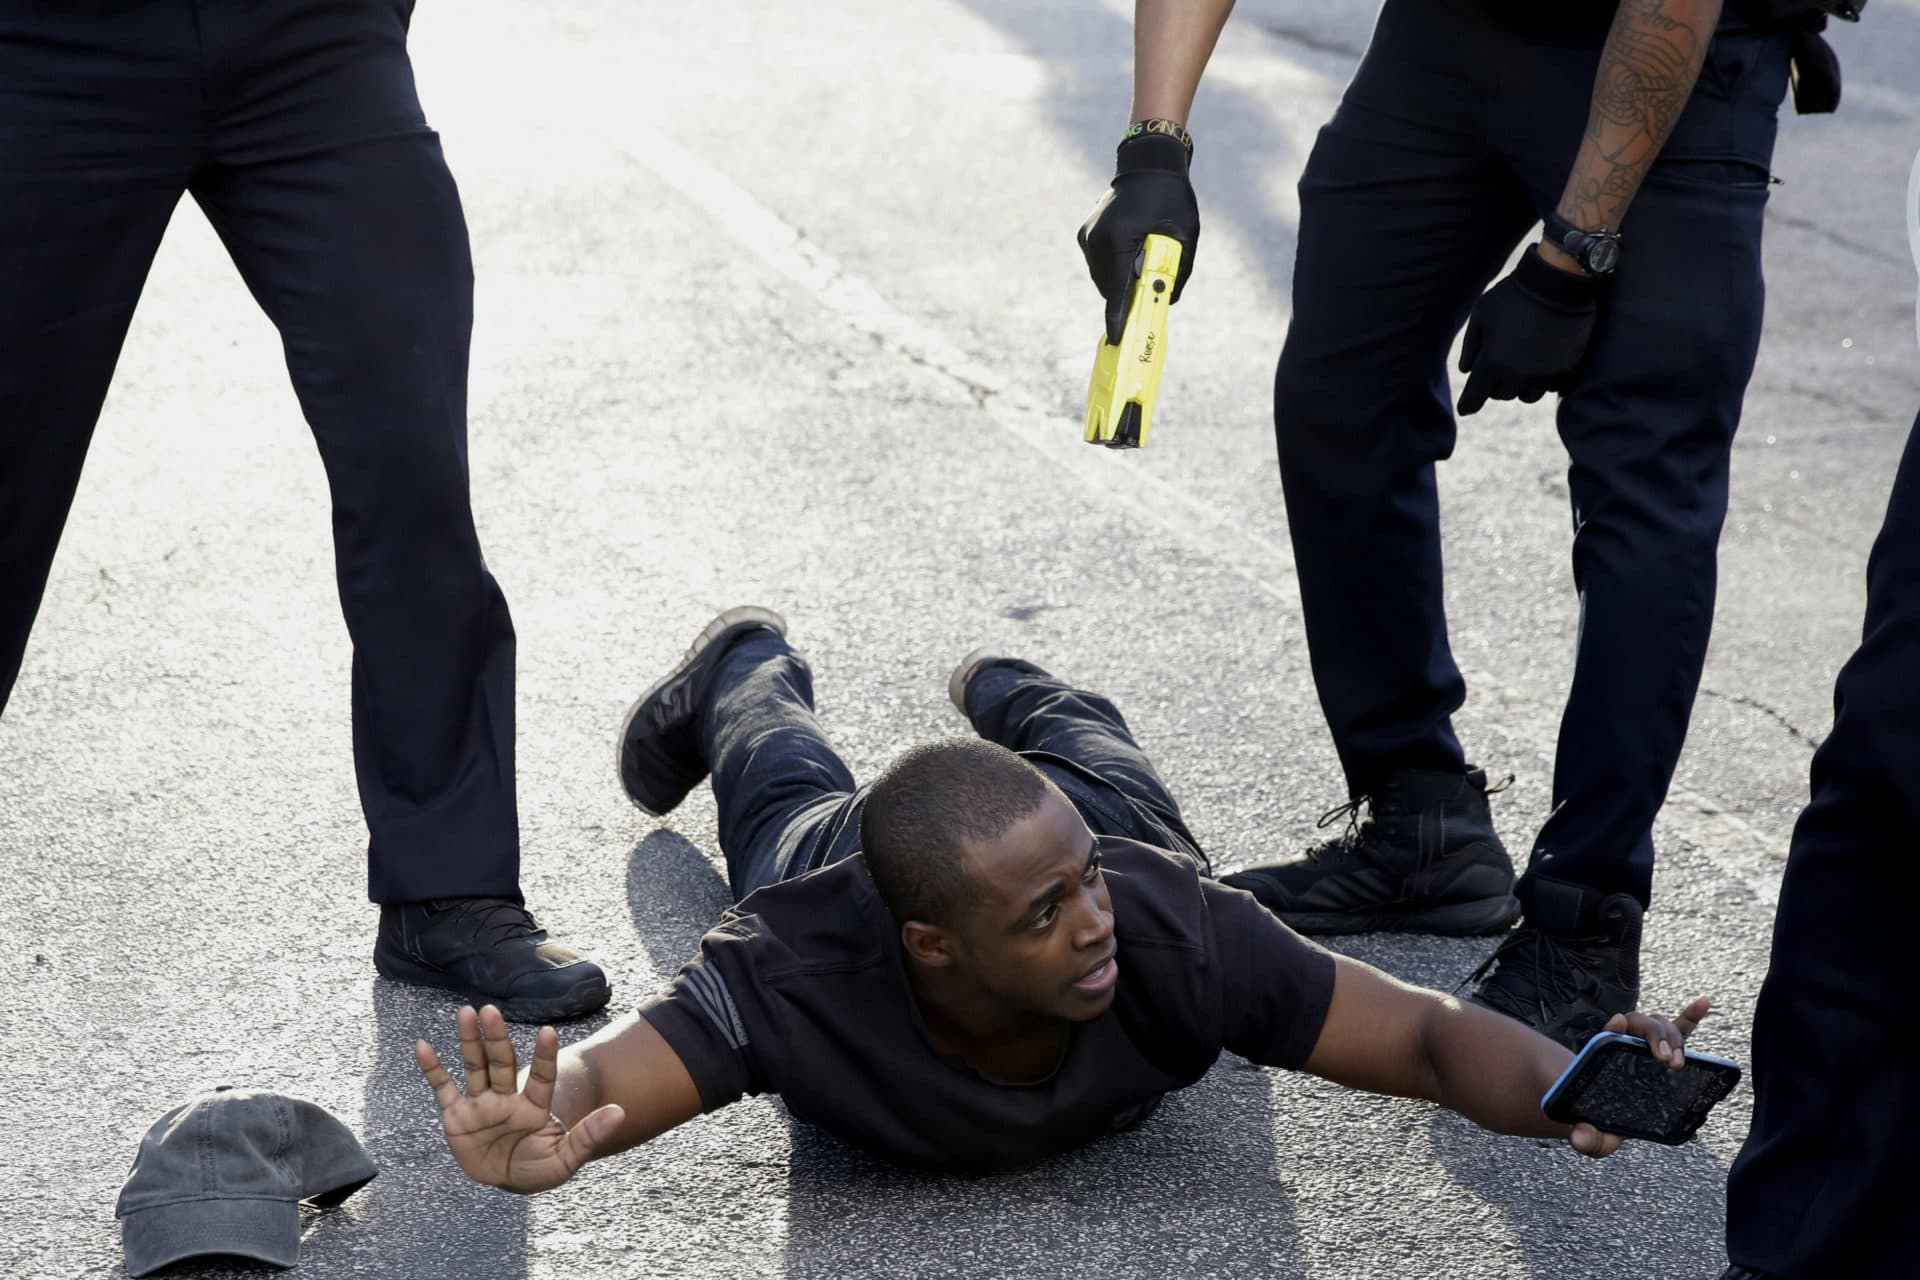 A demonstrator is detained by Atlanta Police during a protest, Saturday, May 30, 2020 in Atlanta. (AP Photo/Brynn Anderson)